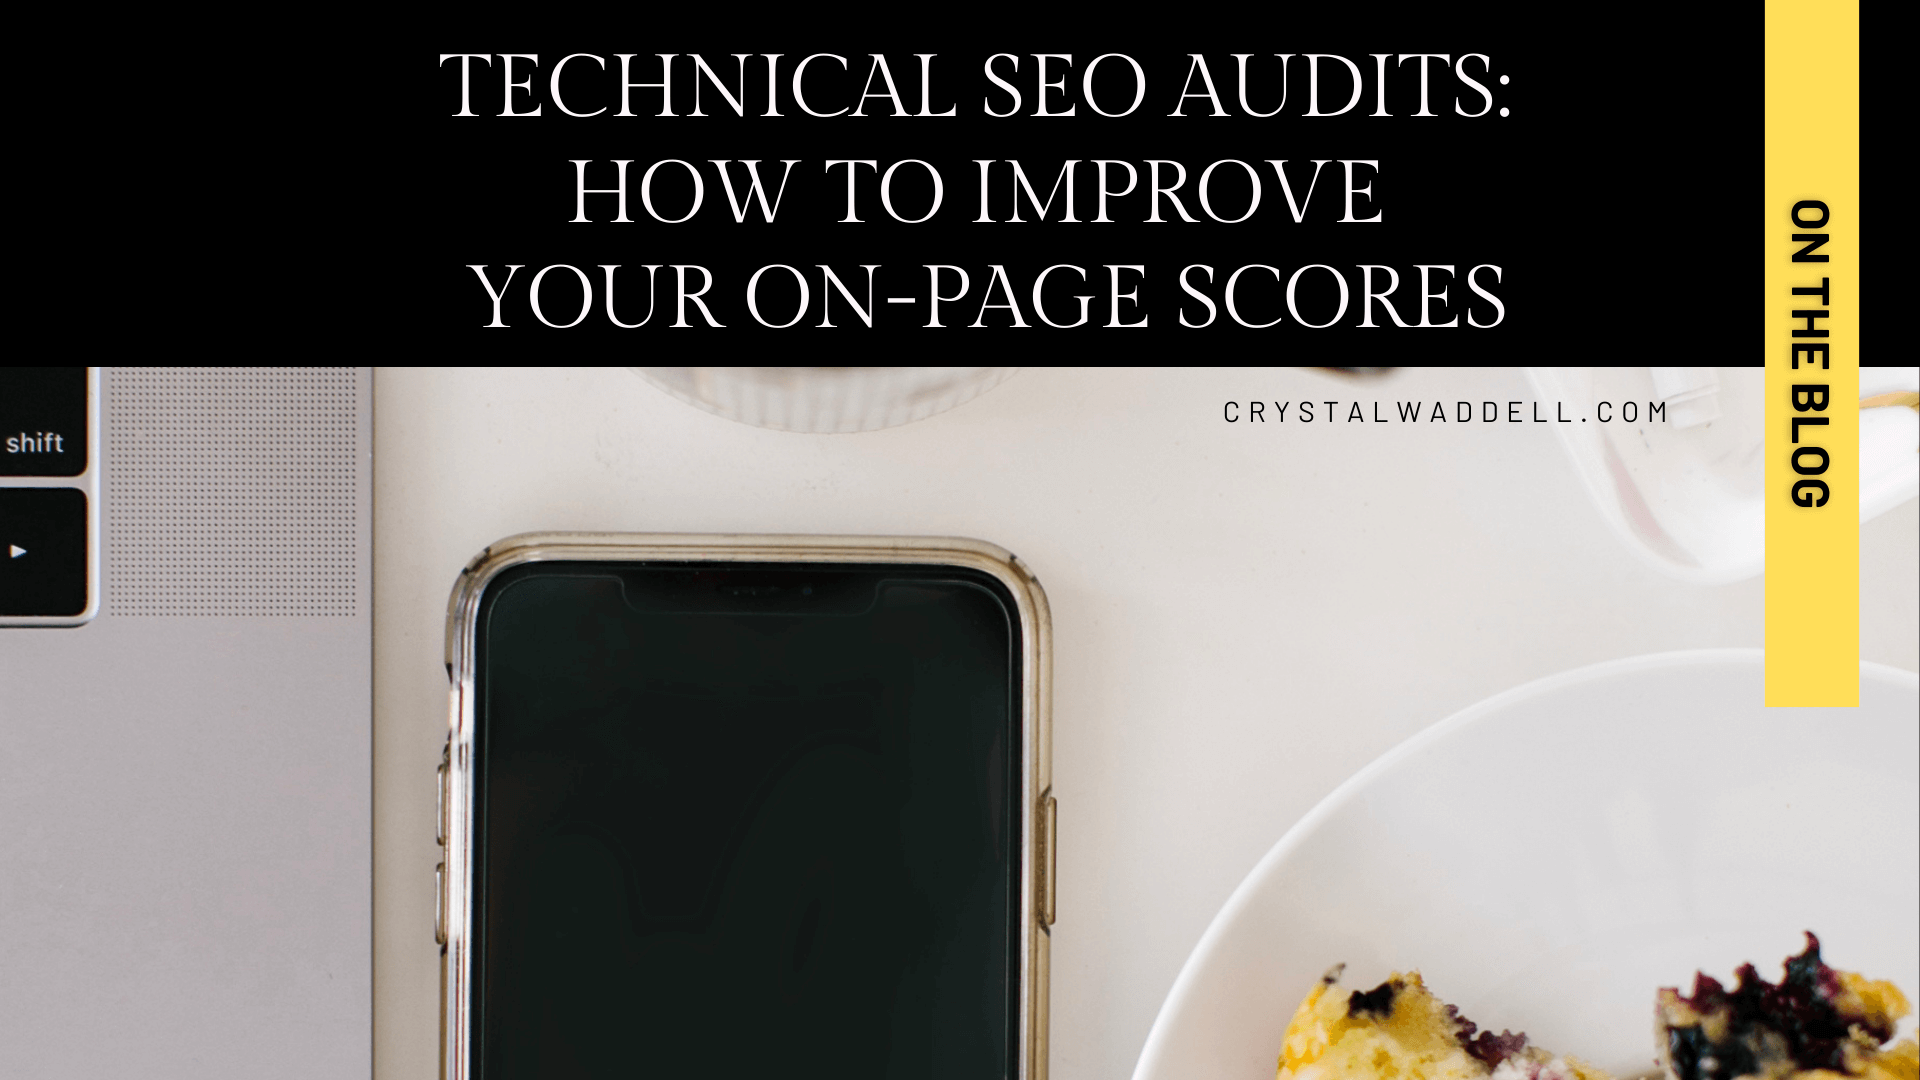 every website owner should perform a technical seo audit. It's a lot easier than you think!